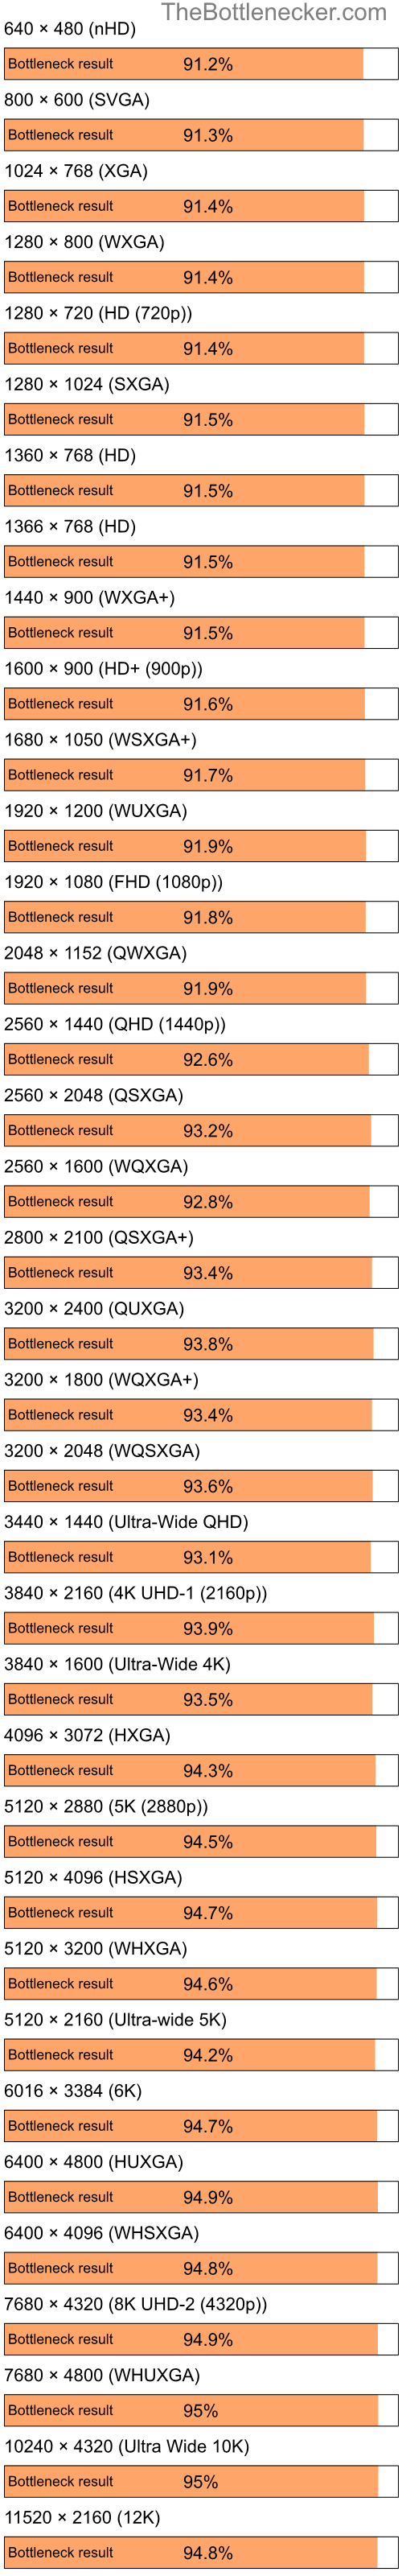 Bottleneck results by resolution for Intel Celeron and AMD Radeon 9200 PRO Family in General Tasks